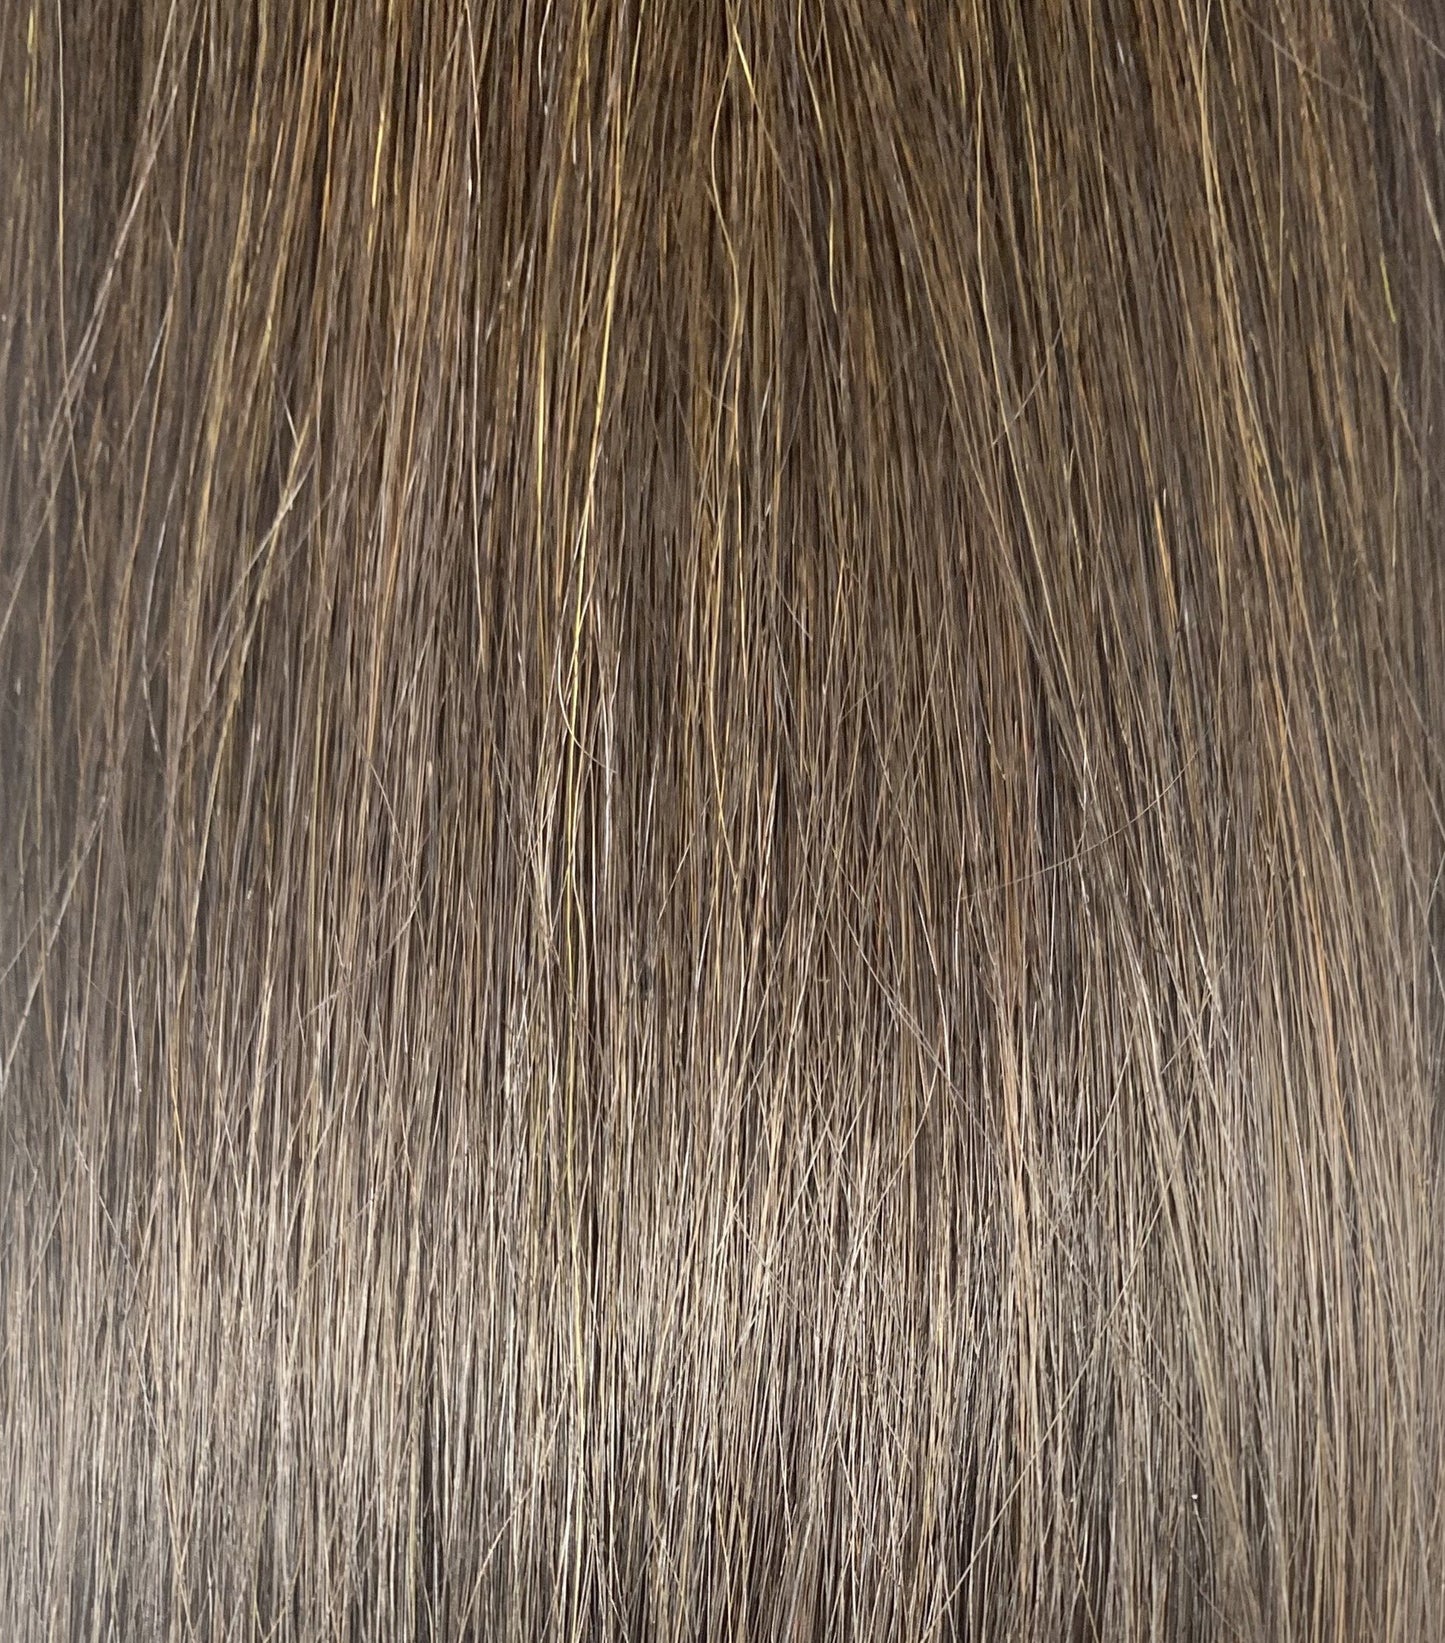 Weft hair extensions #2 - Double - 20 inches - Dark Chestnut Weft DR Hair Products Co 